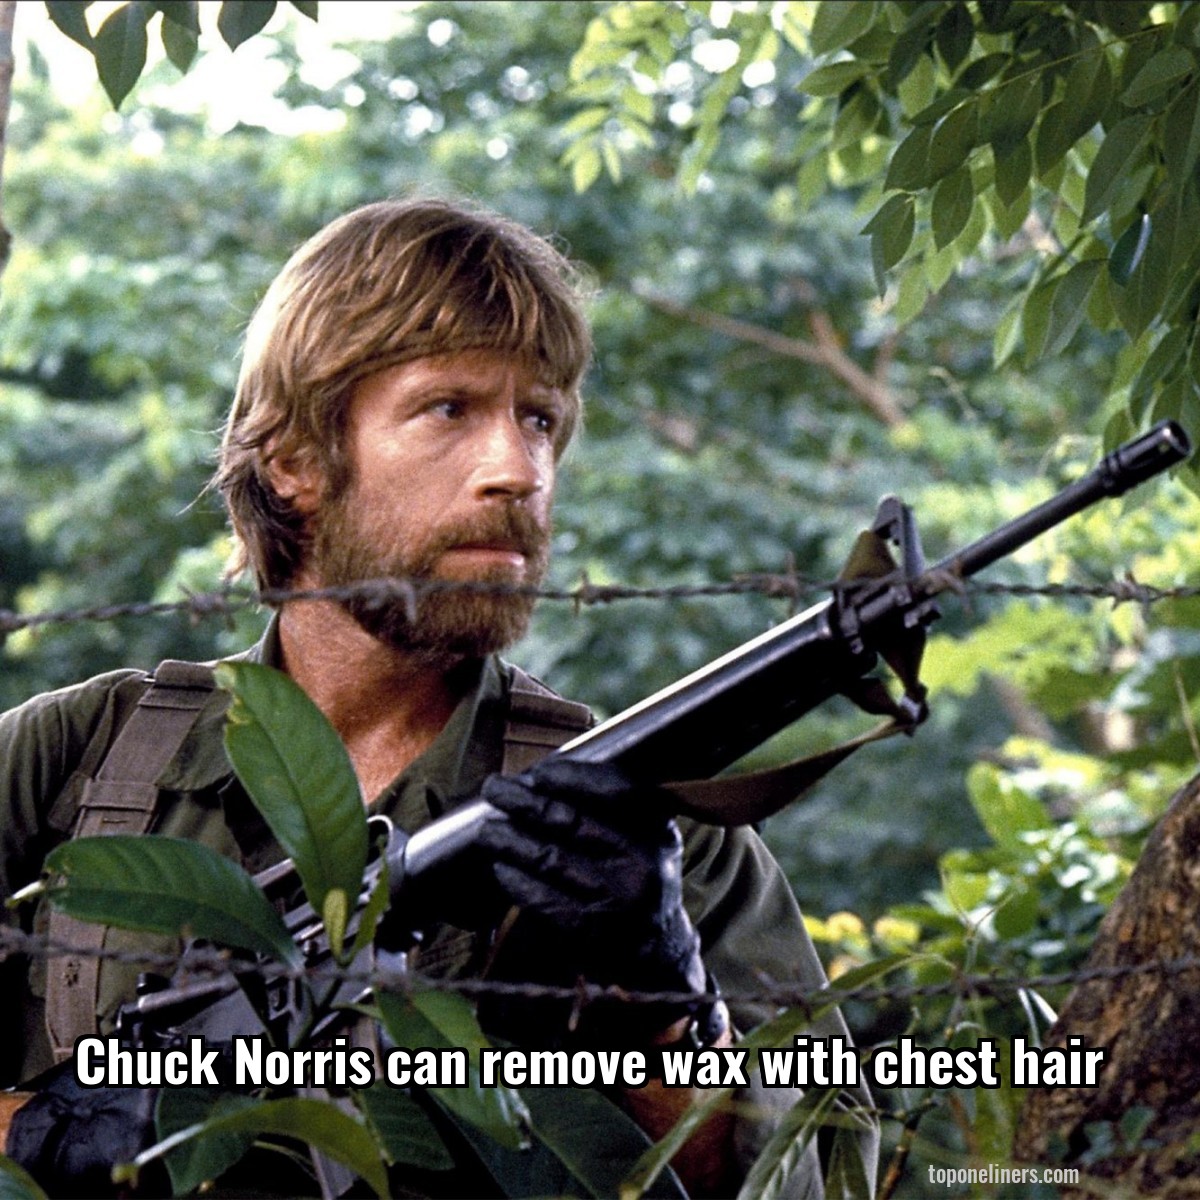 Chuck Norris can remove wax with chest hair